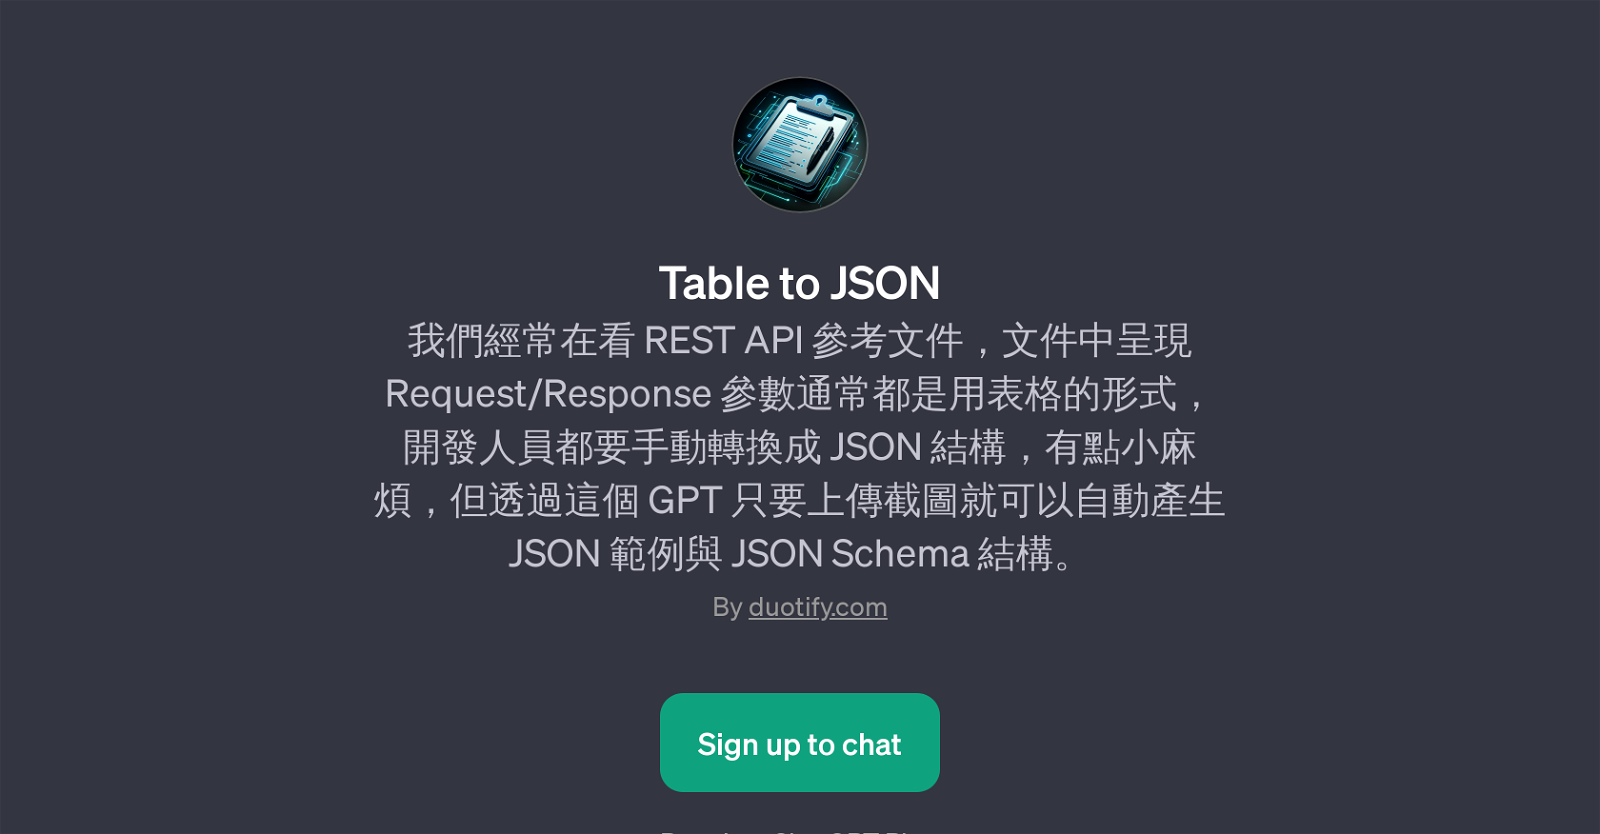 Table to JSON website